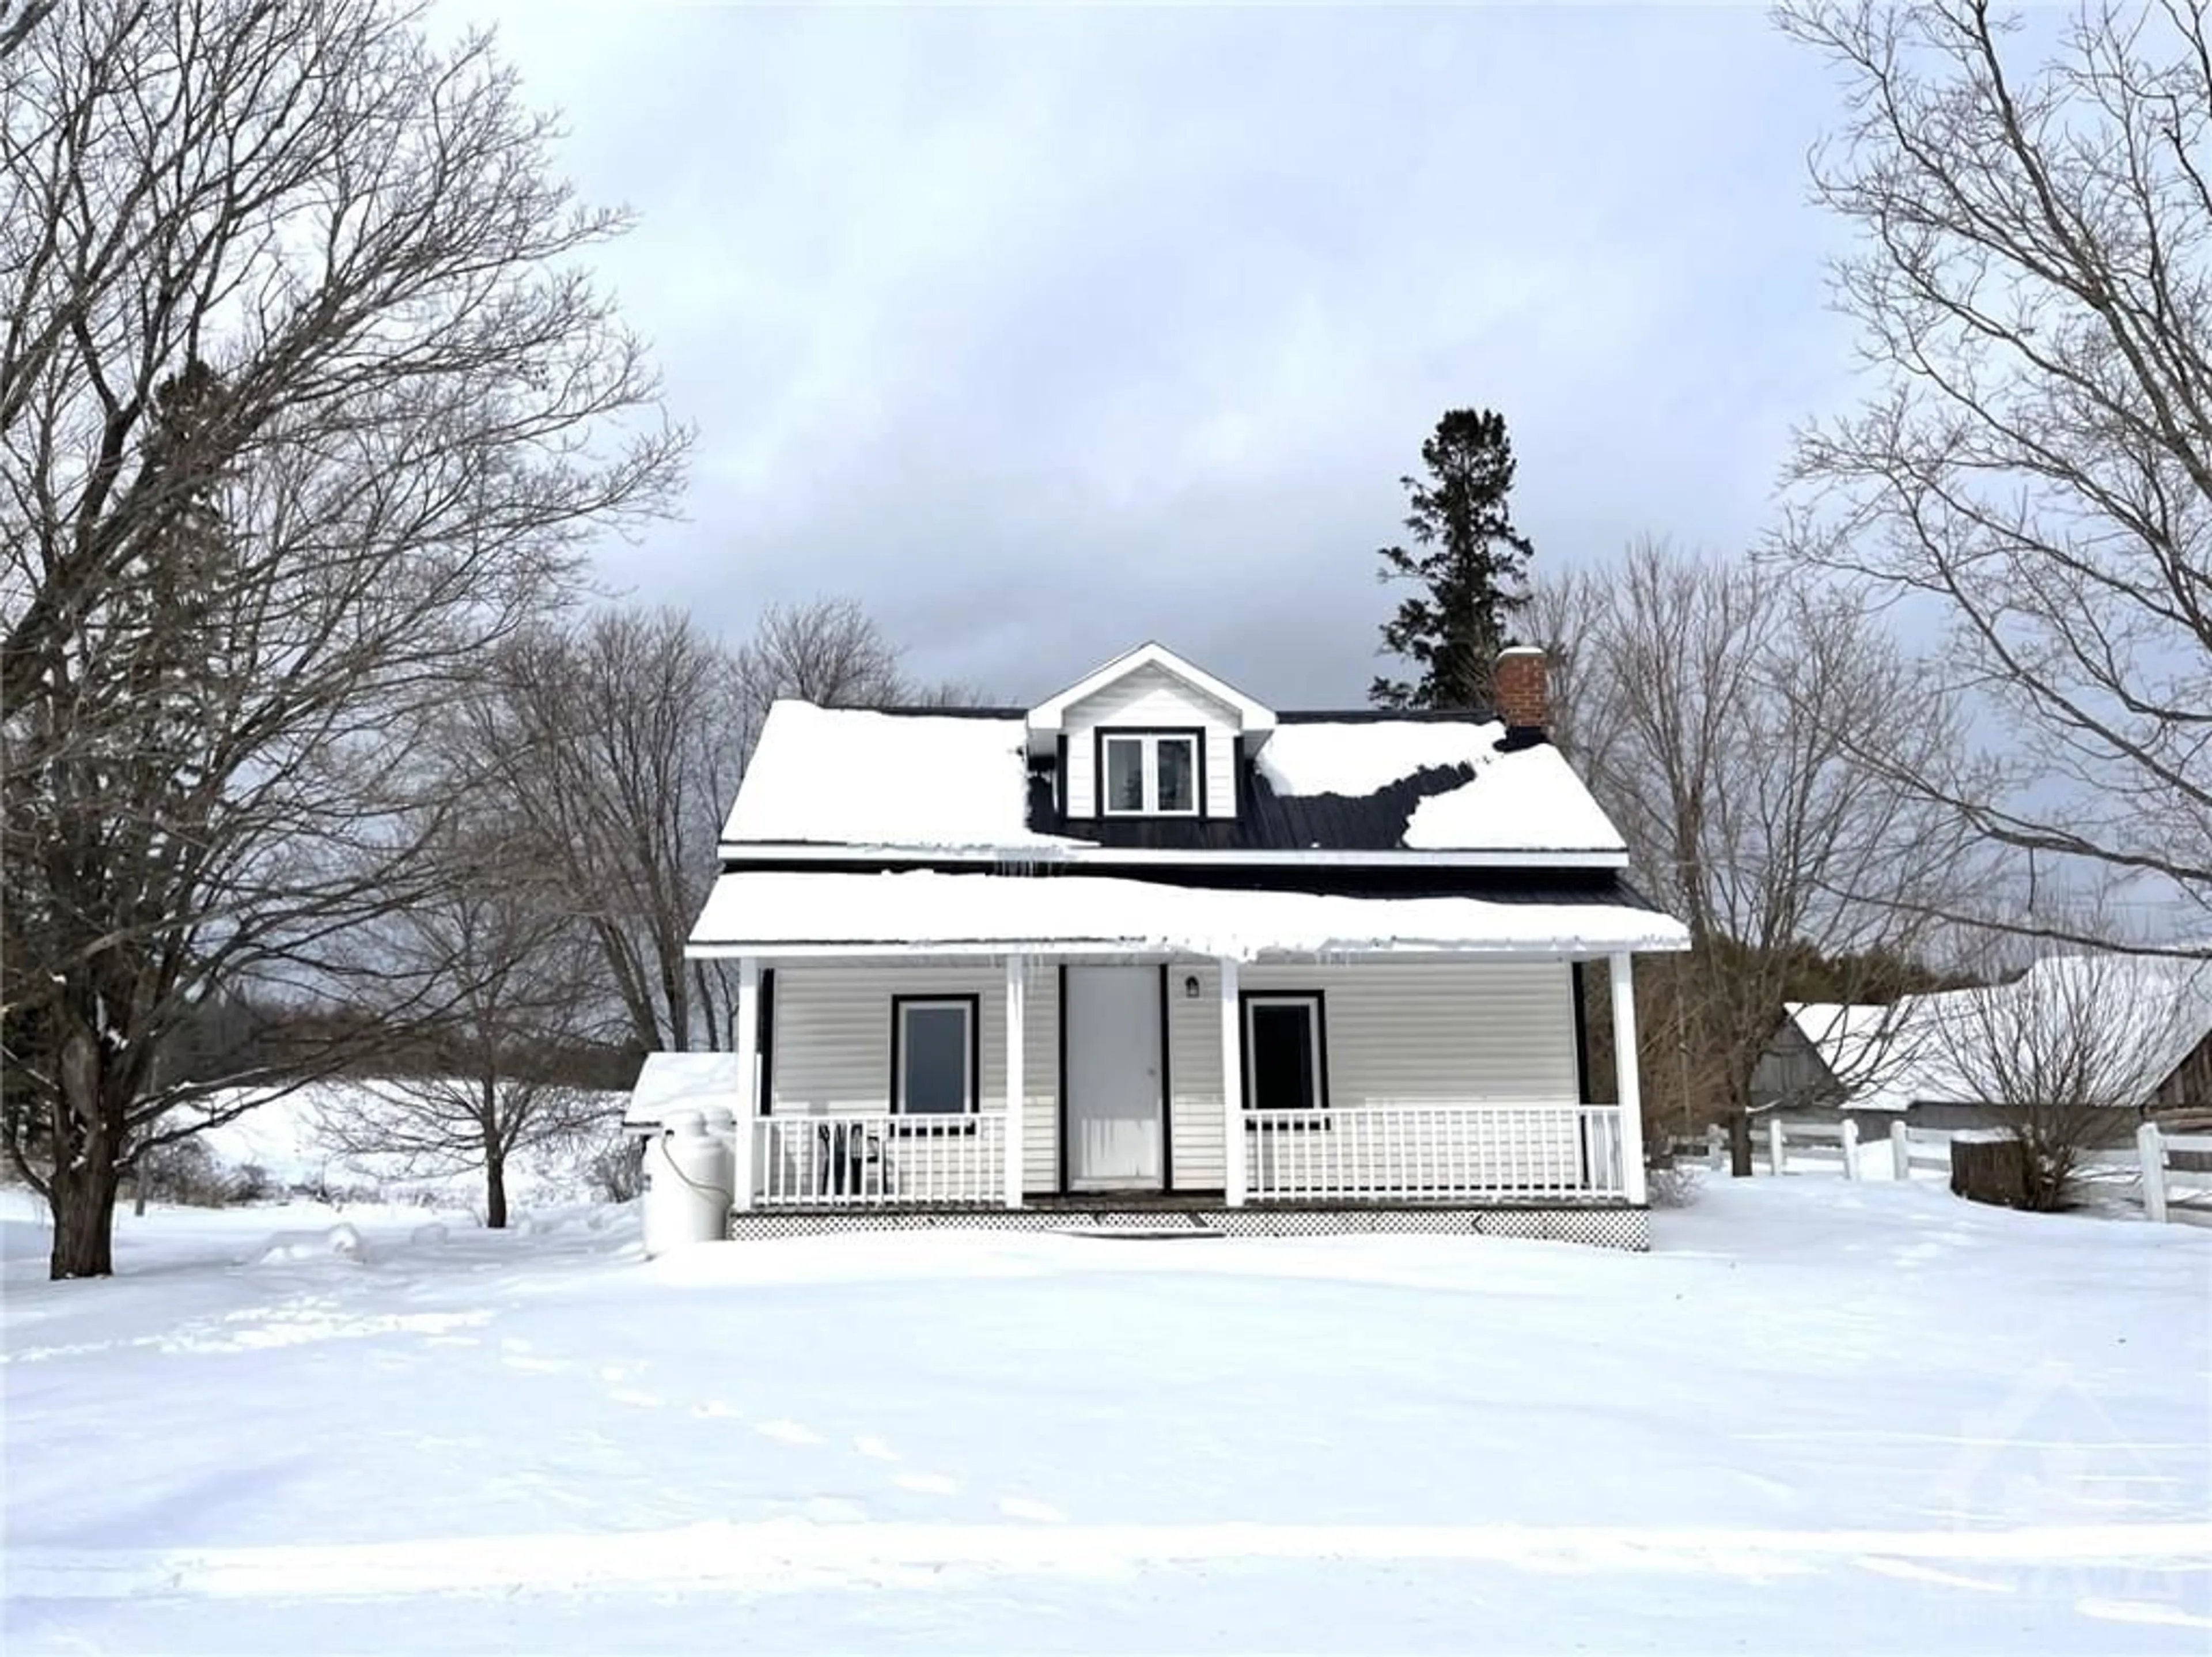 Home with unknown exterior material for 927 NORTON Rd, Calabogie Ontario K7V 3Z9